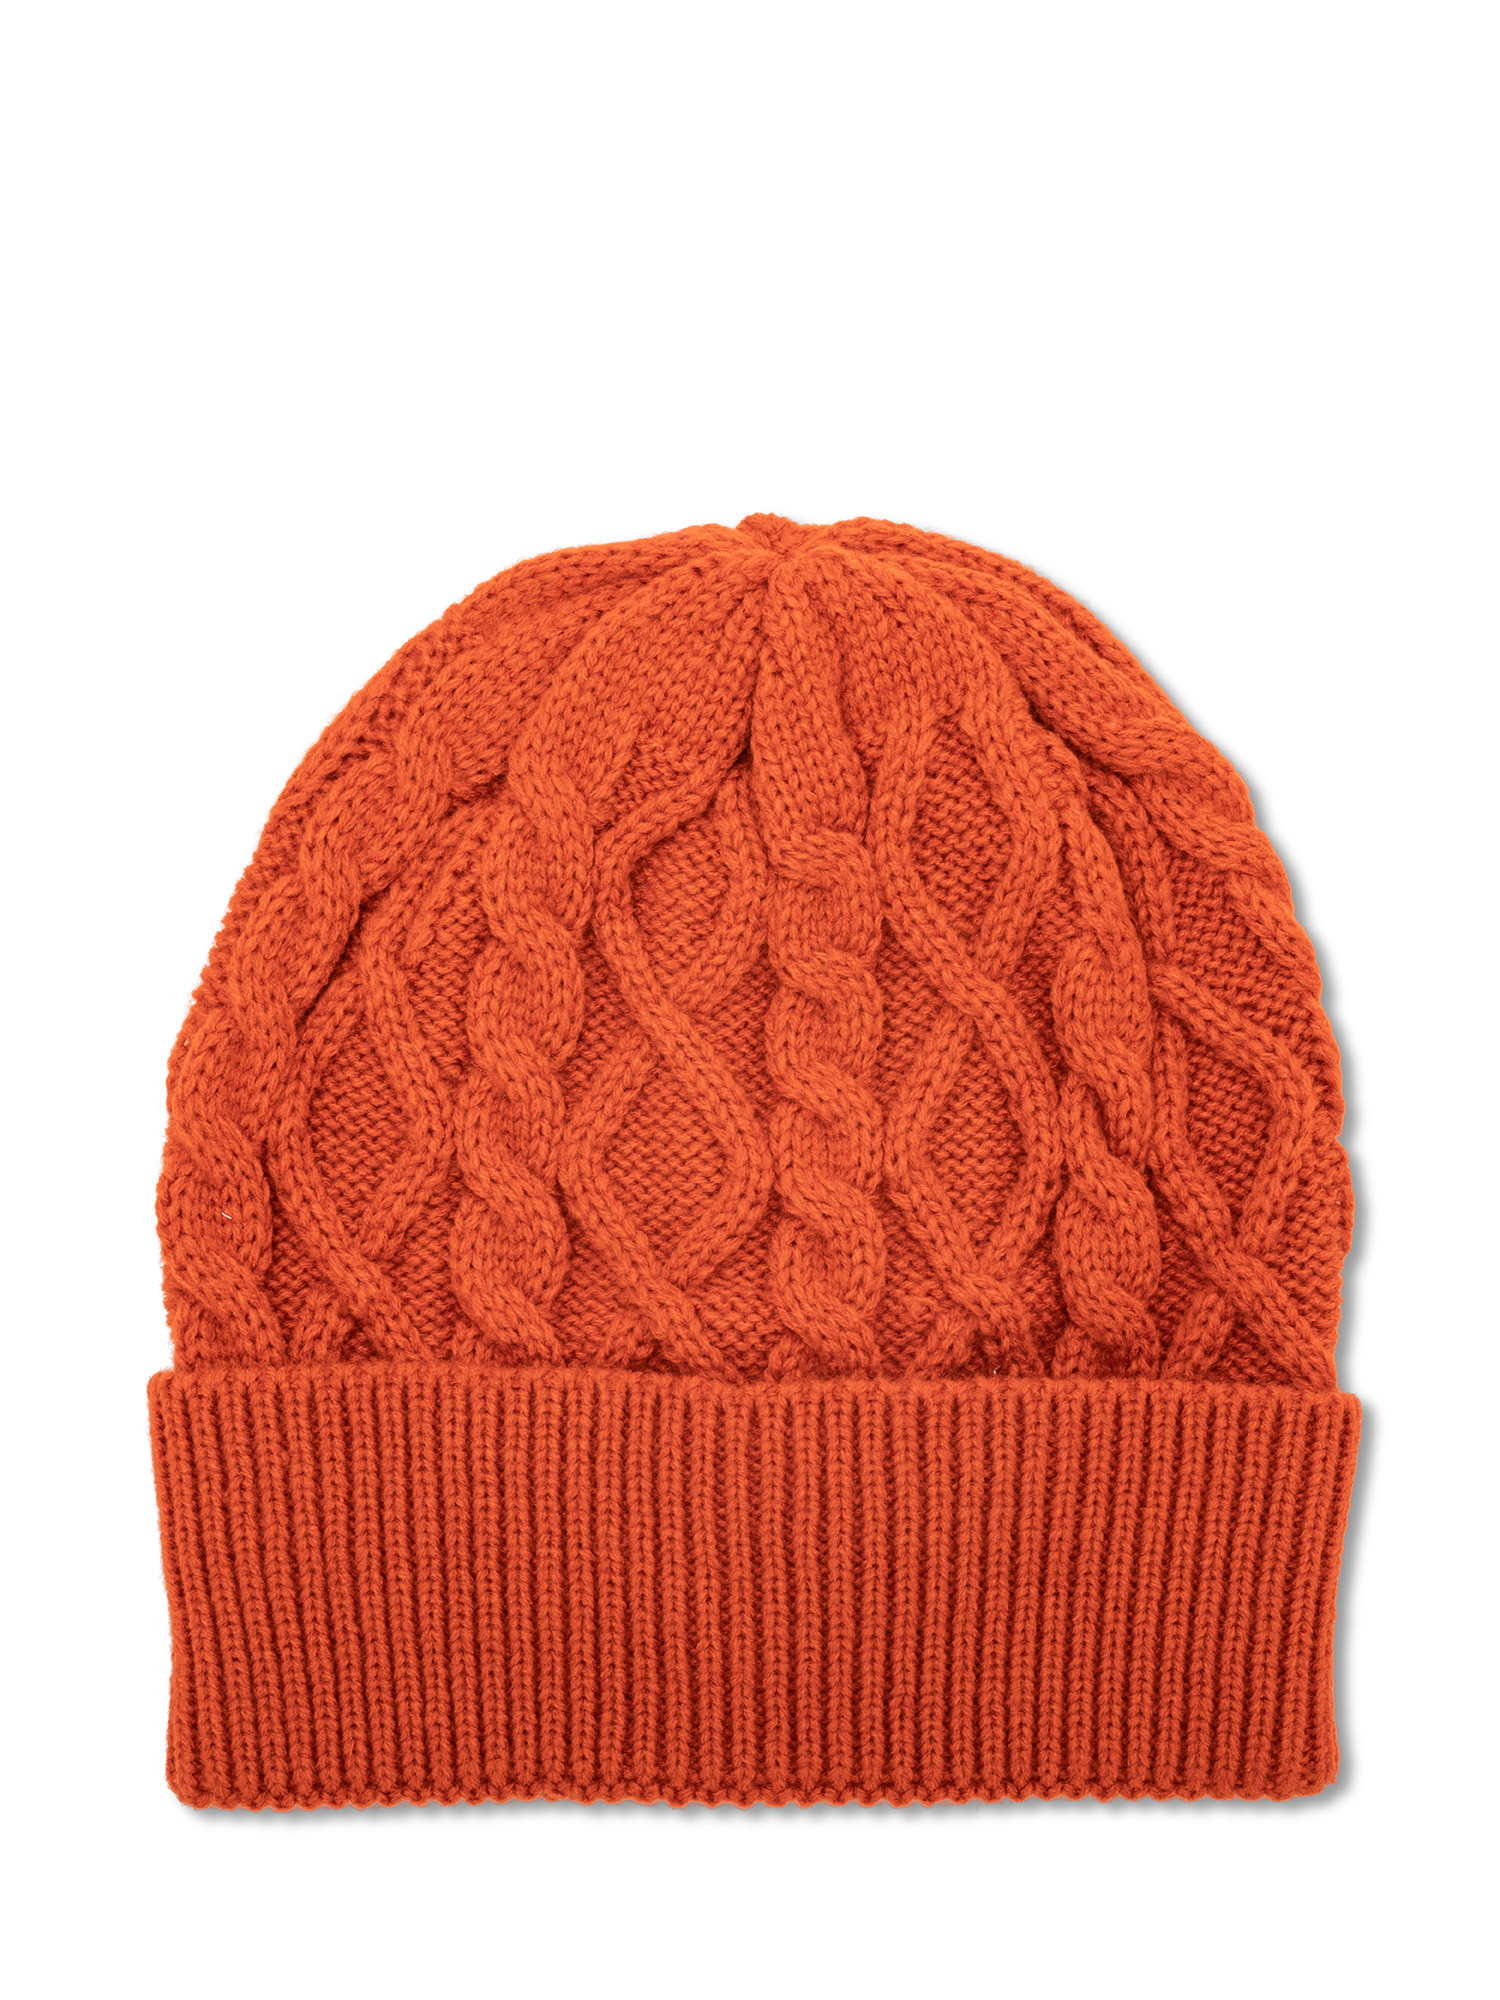 Luca D'Altieri - Beanie with knitted pattern, Red, large image number 0